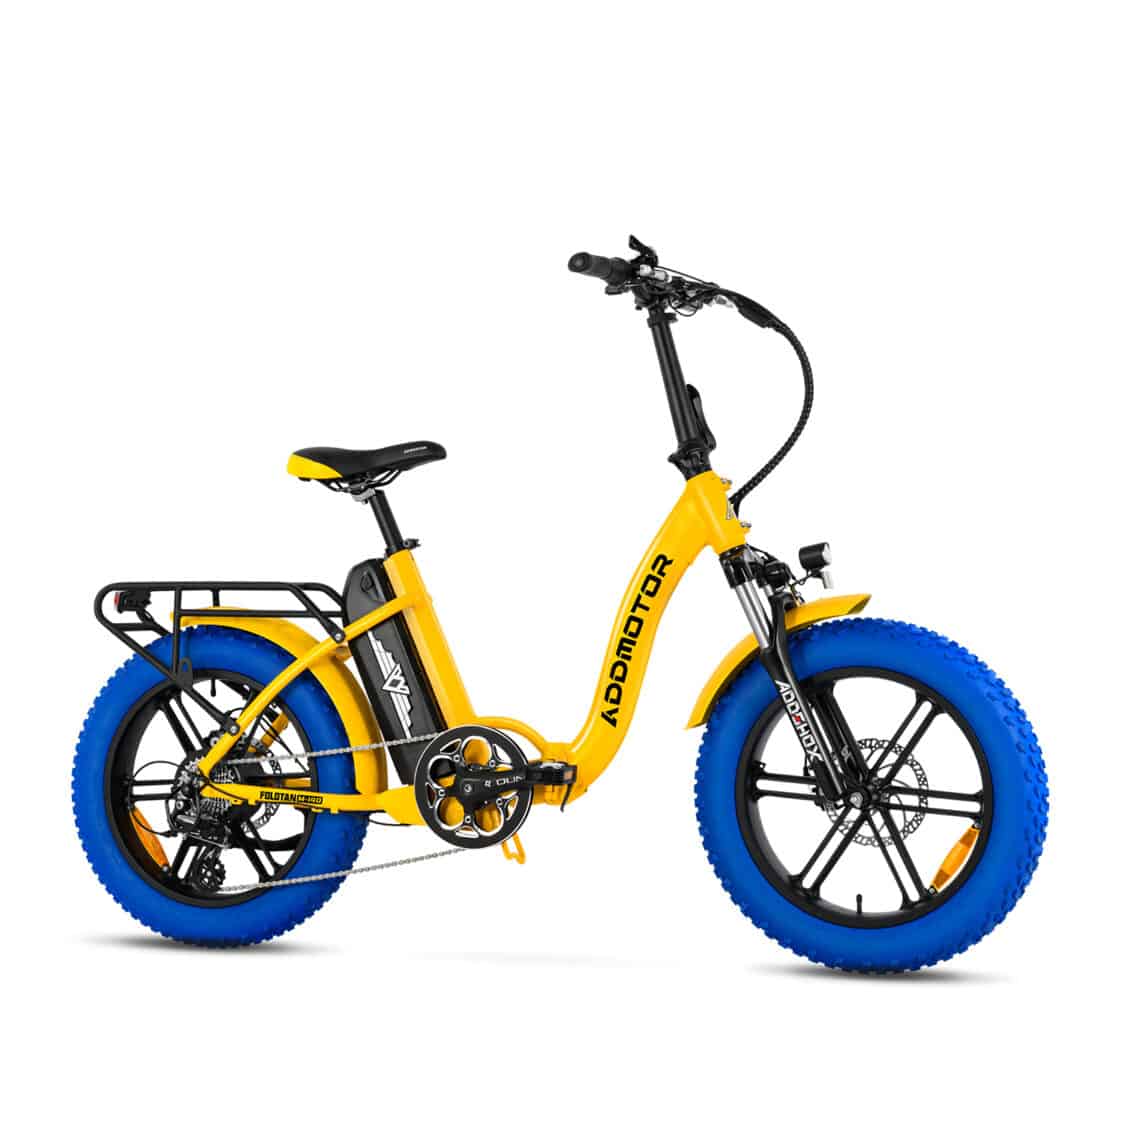 Photo of Addmotor Foldtan M-140 foldable fat tire electric bike with yellow frame and blue tires.